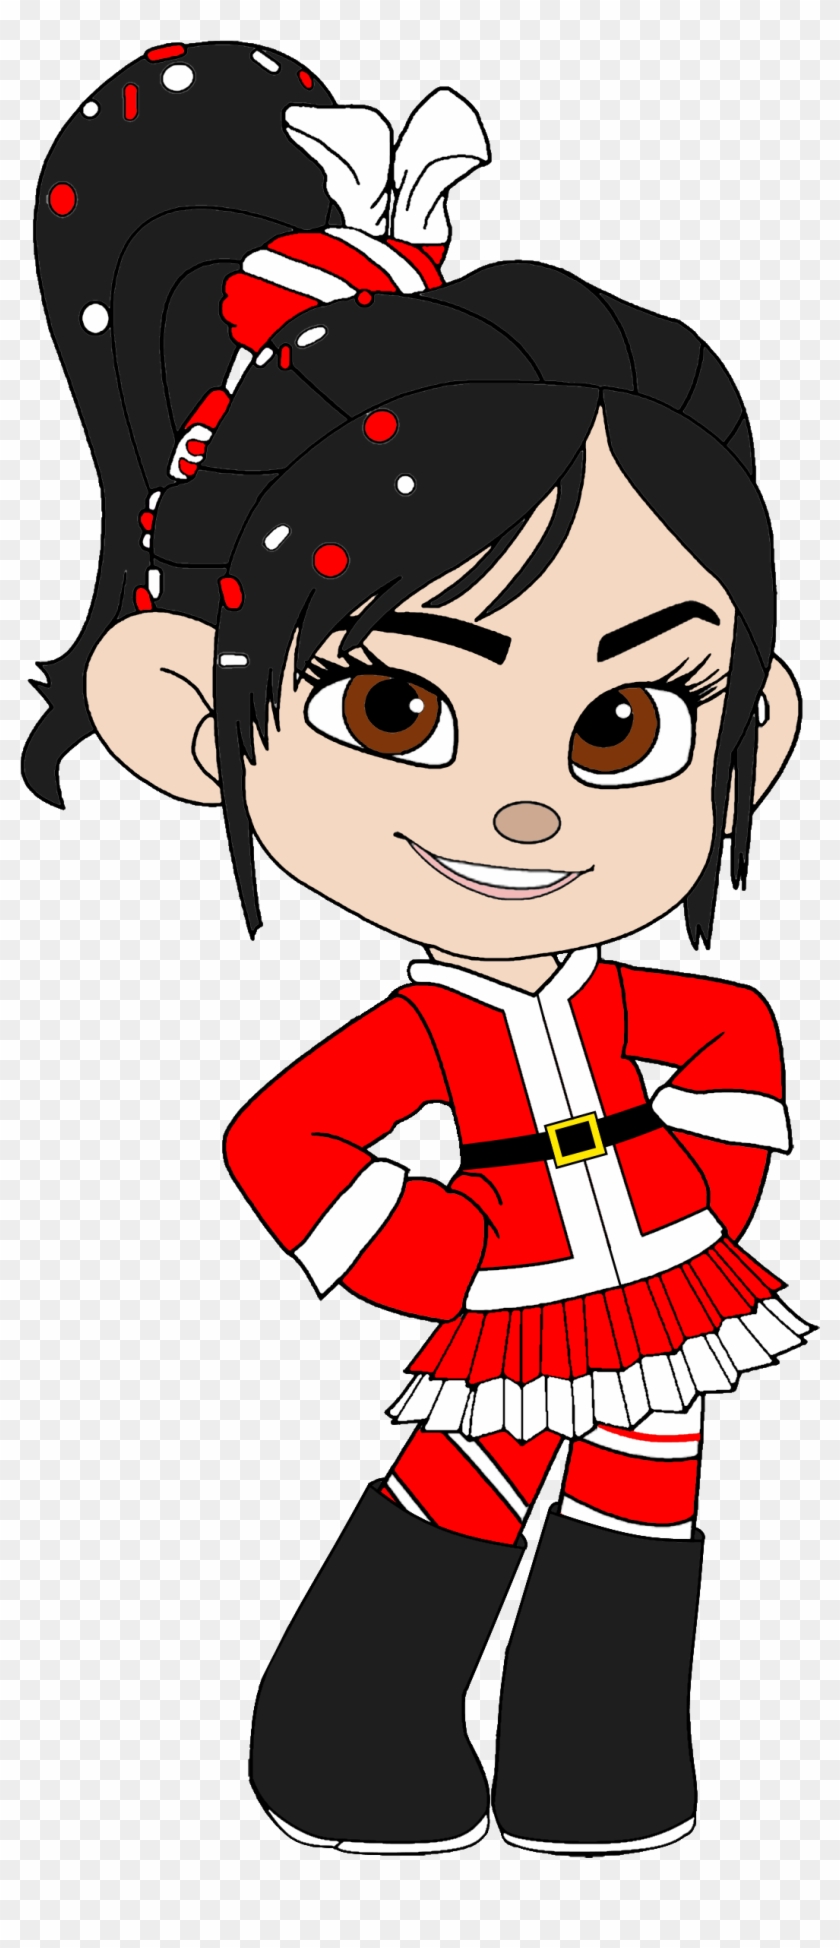 Vanellope's Adventures Images Vanellope As Mrs Claus - Candy Vanellope Wreck It Ralph Clipart #3531770